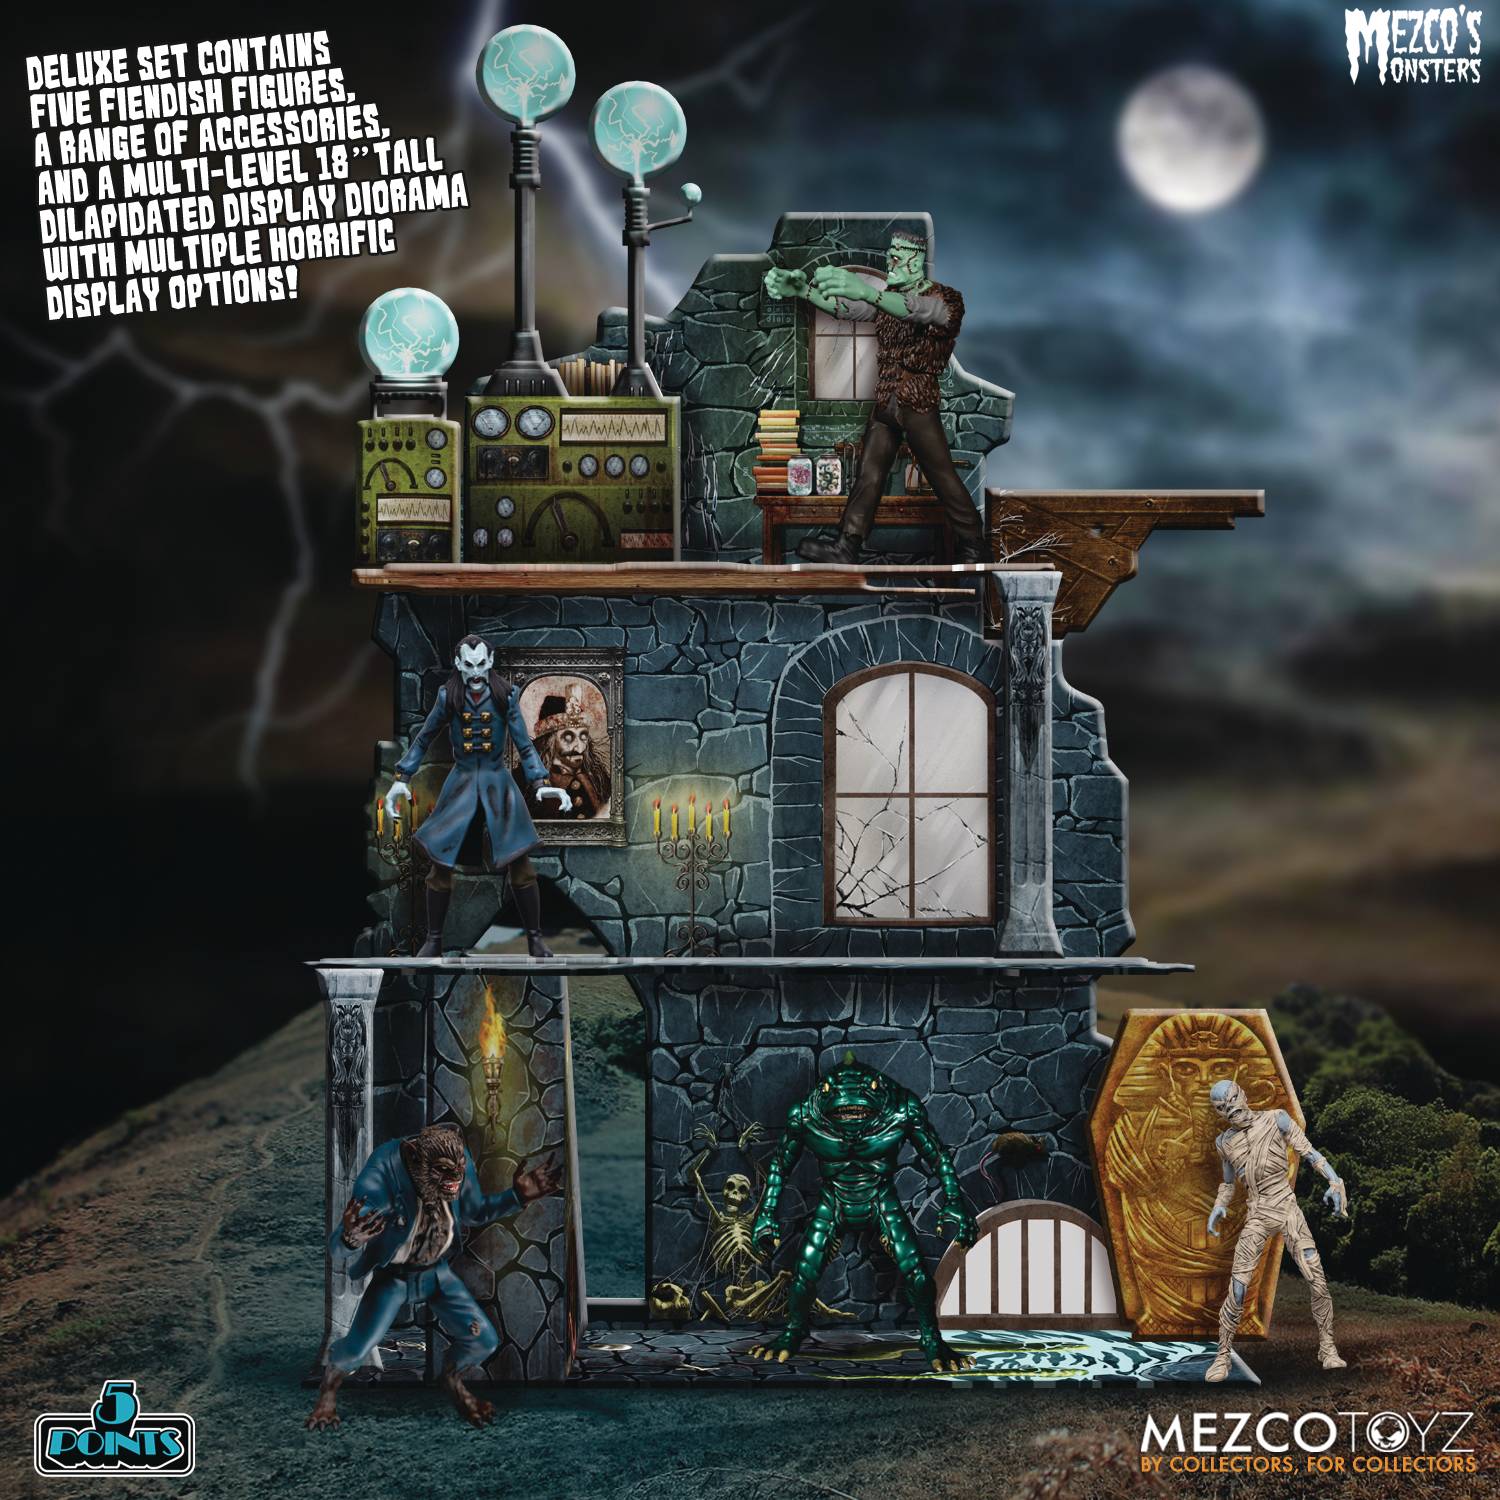 5 POINTS MEZCOS MONSTERS TOWER OF FEAR DELUXE BOXED SET (NET